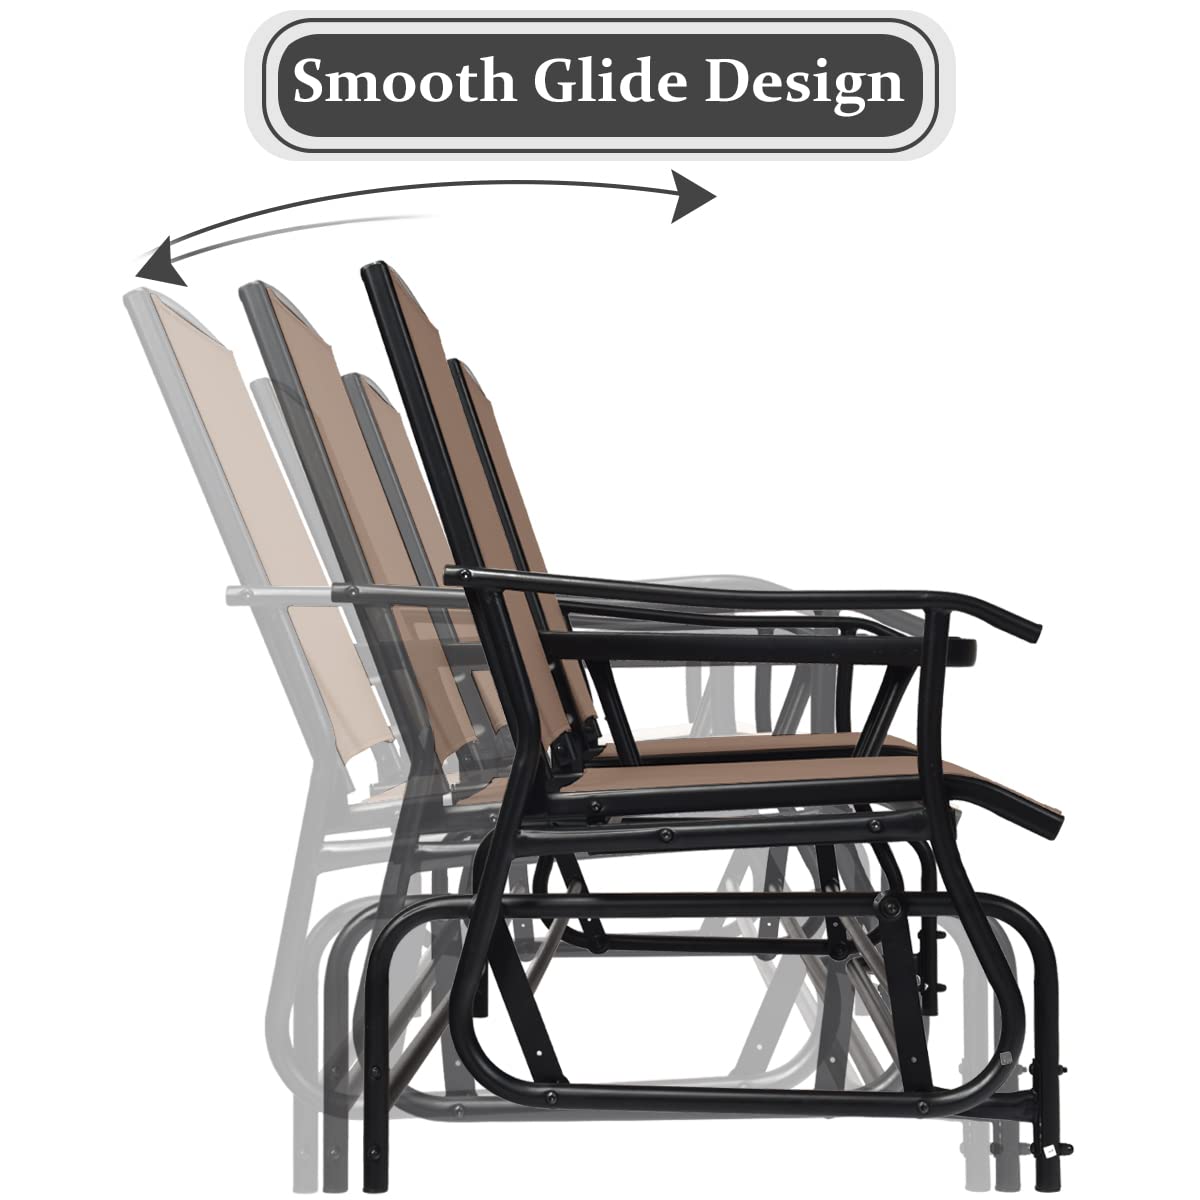 Giantex 2 Person Outdoor Double Glider Chair, Mesh Fabric Rocking Chair w/Center Tempered Glass Table